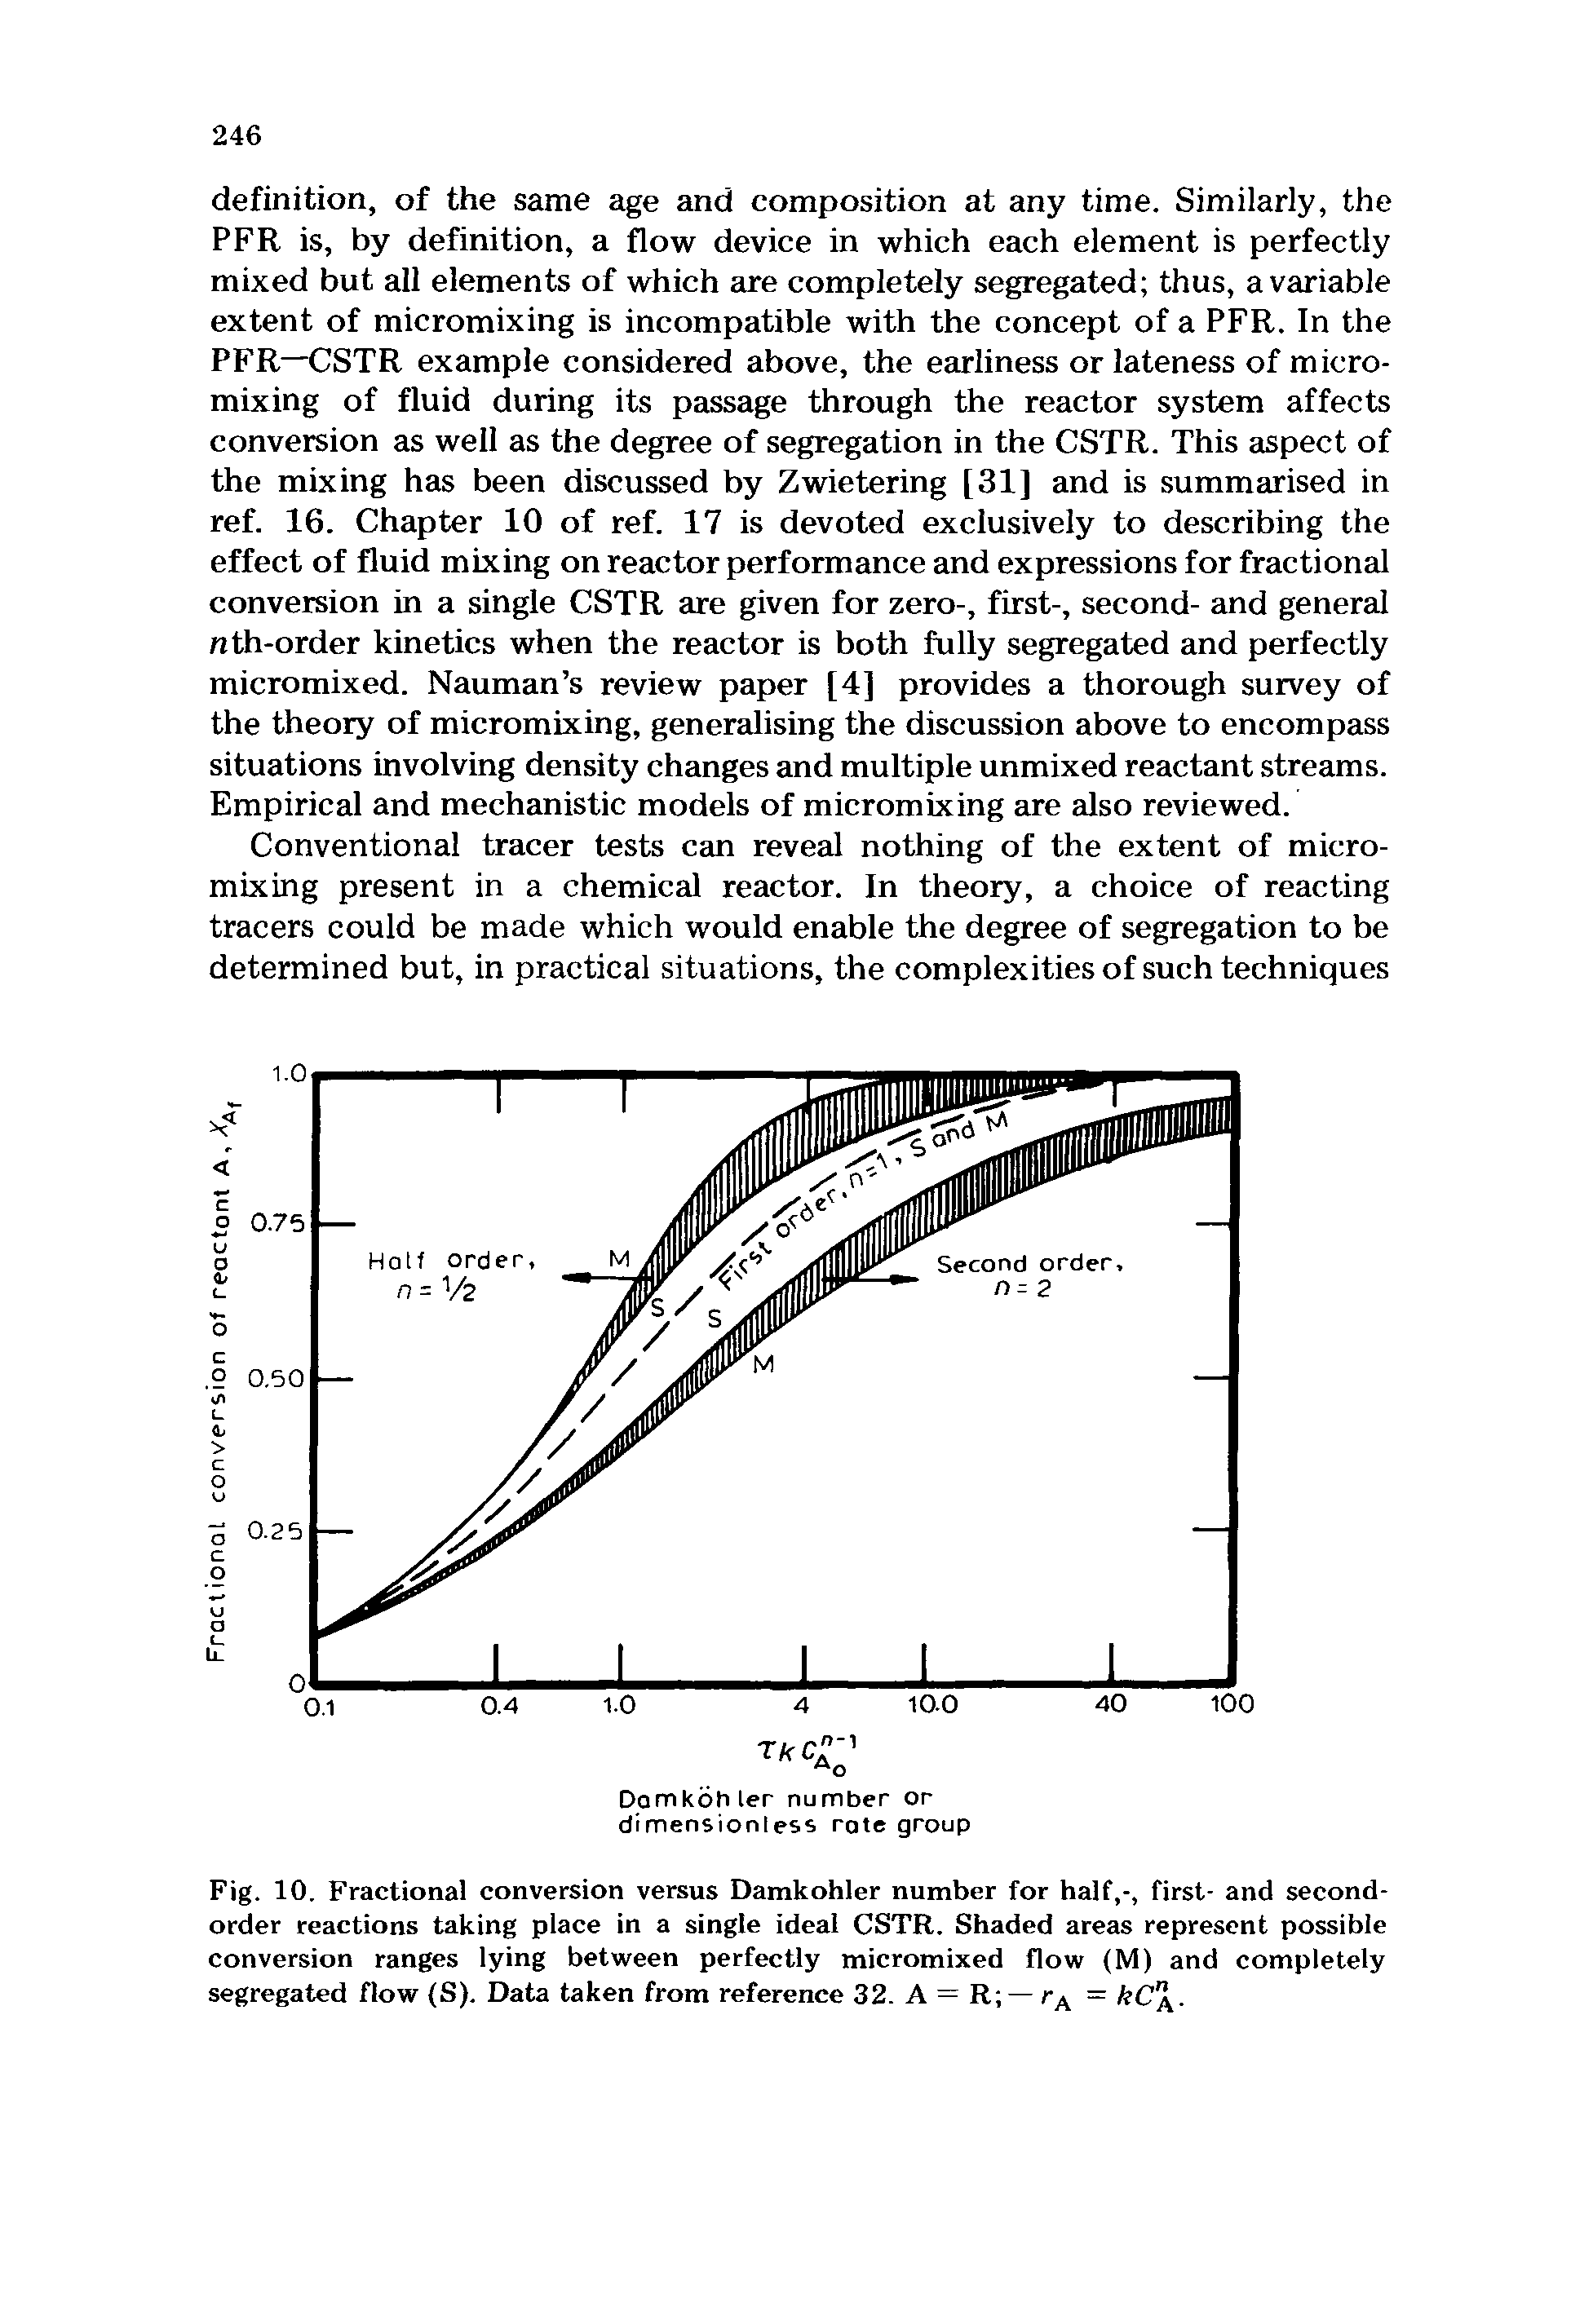 Fig. 10. Fractional conversion versus Damkohler number for half,-, first- and second-order reactions taking place in a single ideal CSTR. Shaded areas represent possible conversion ranges lying between perfectly micromixed flow (M) and completely segregated flow (S). Data taken from reference 32. A = R —...